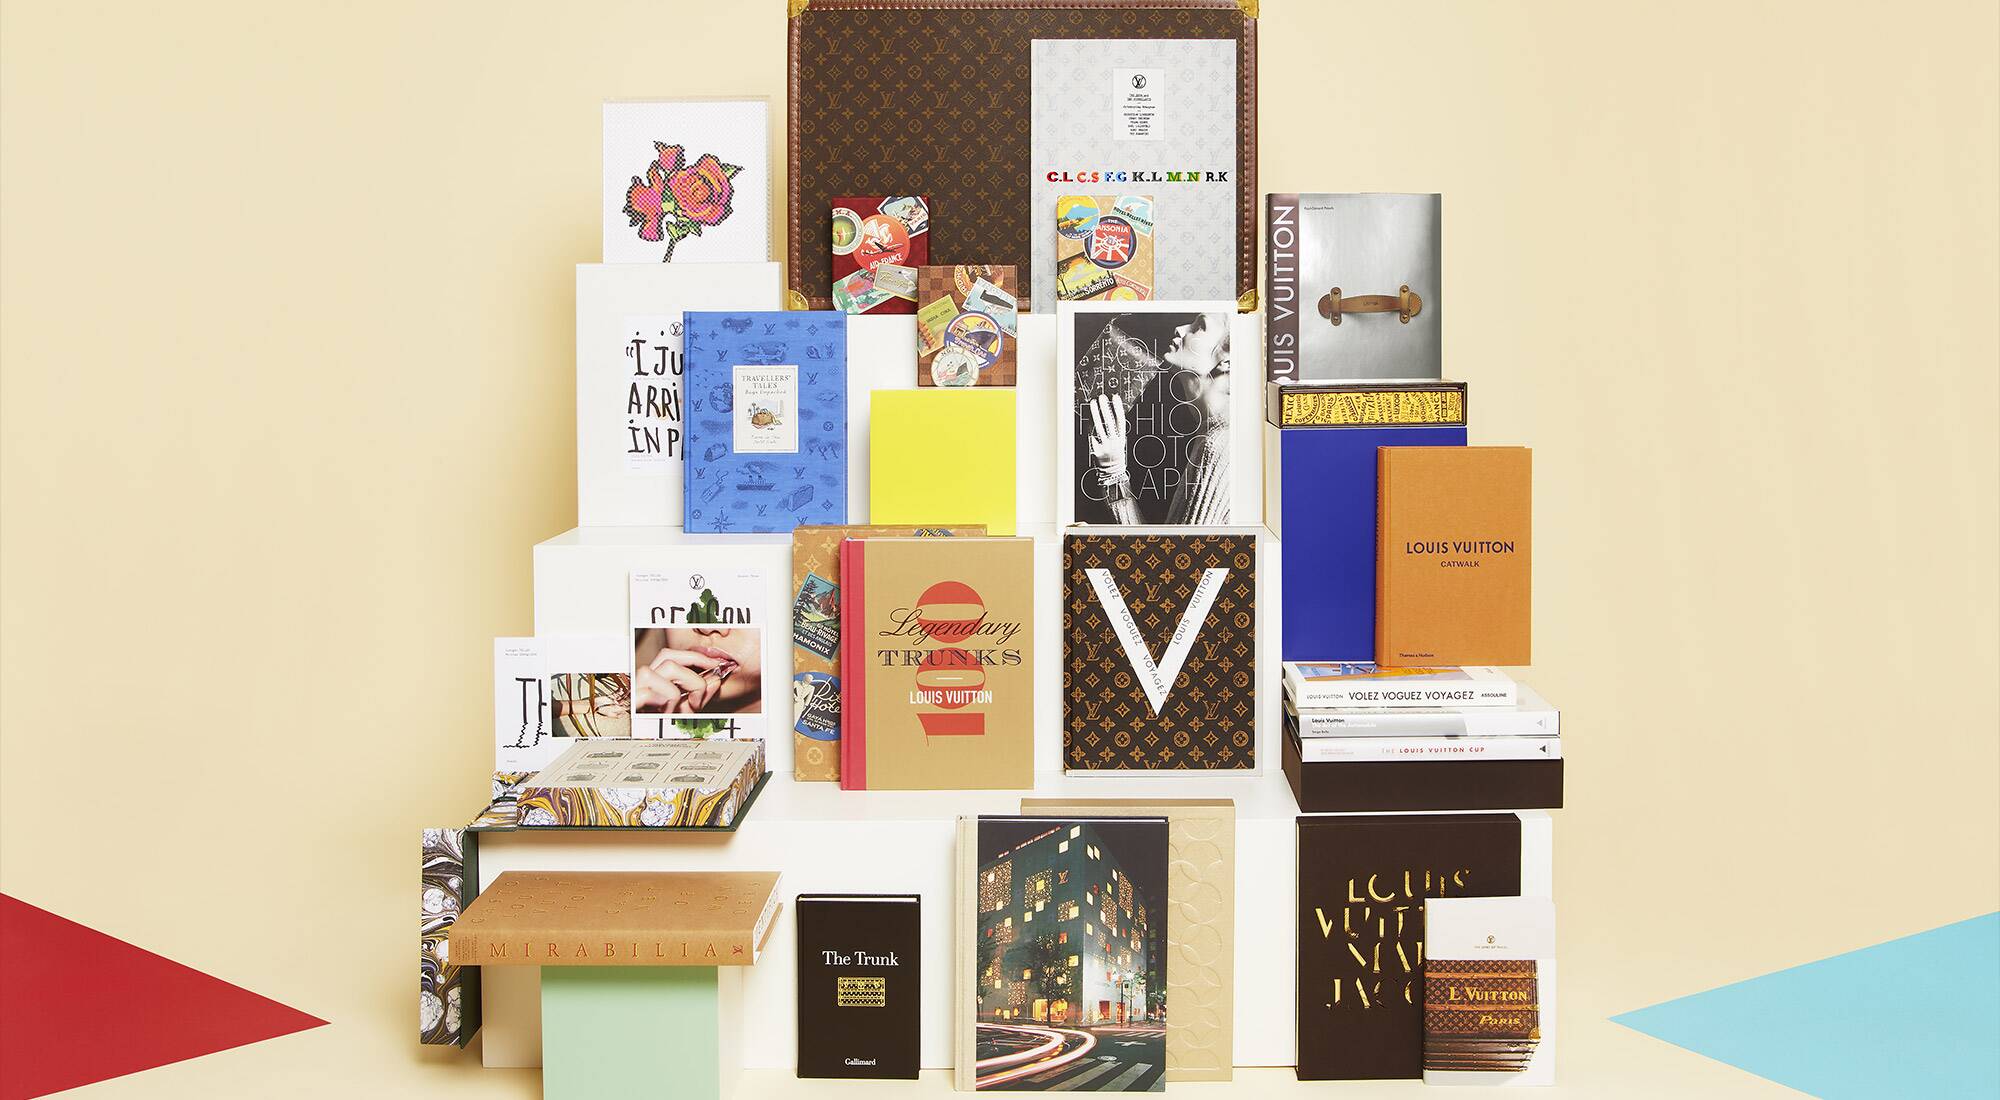 Louis Vuitton enlivens Paris cultural scene with new bookstore in